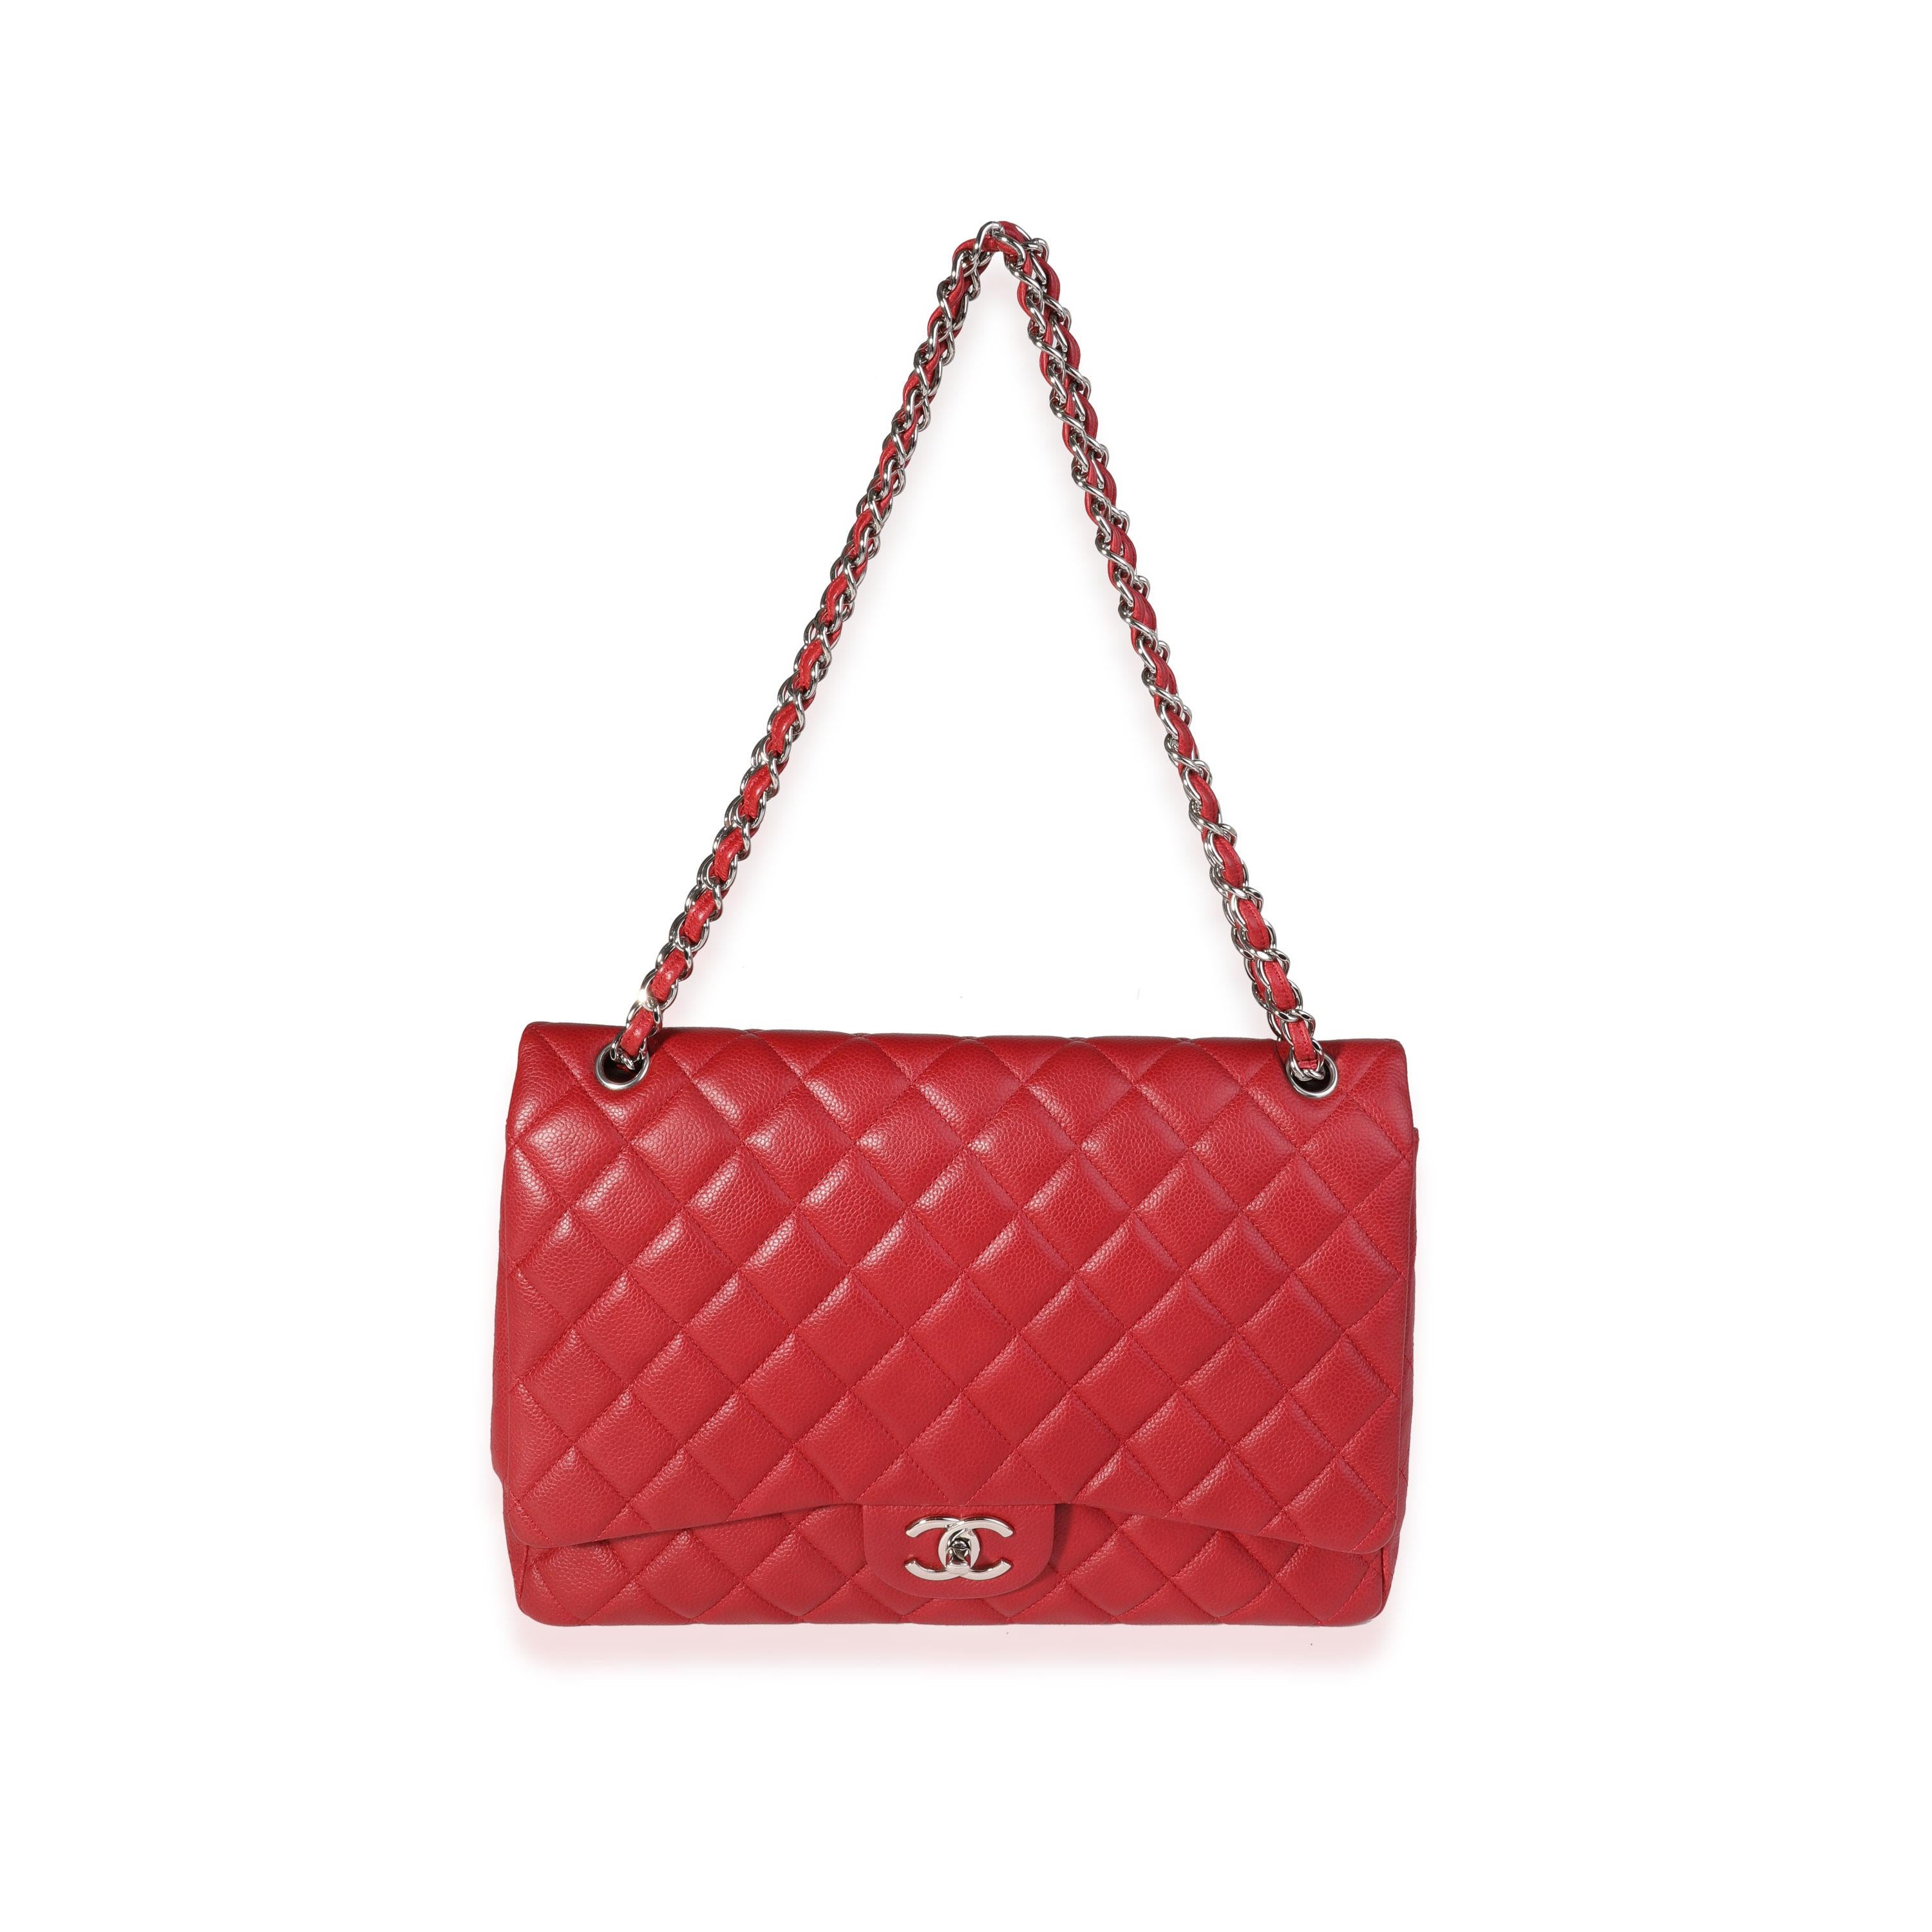 Listing Title: Chanel Red Quilted Caviar Maxi Classic Double Flap Bag
SKU: 121374
MSRP: 10000.00
Condition: Pre-owned (3000)
Handbag Condition: Very Good
Condition Comments: Very Good Condition. Light scuffing to corners. Minor scratching at